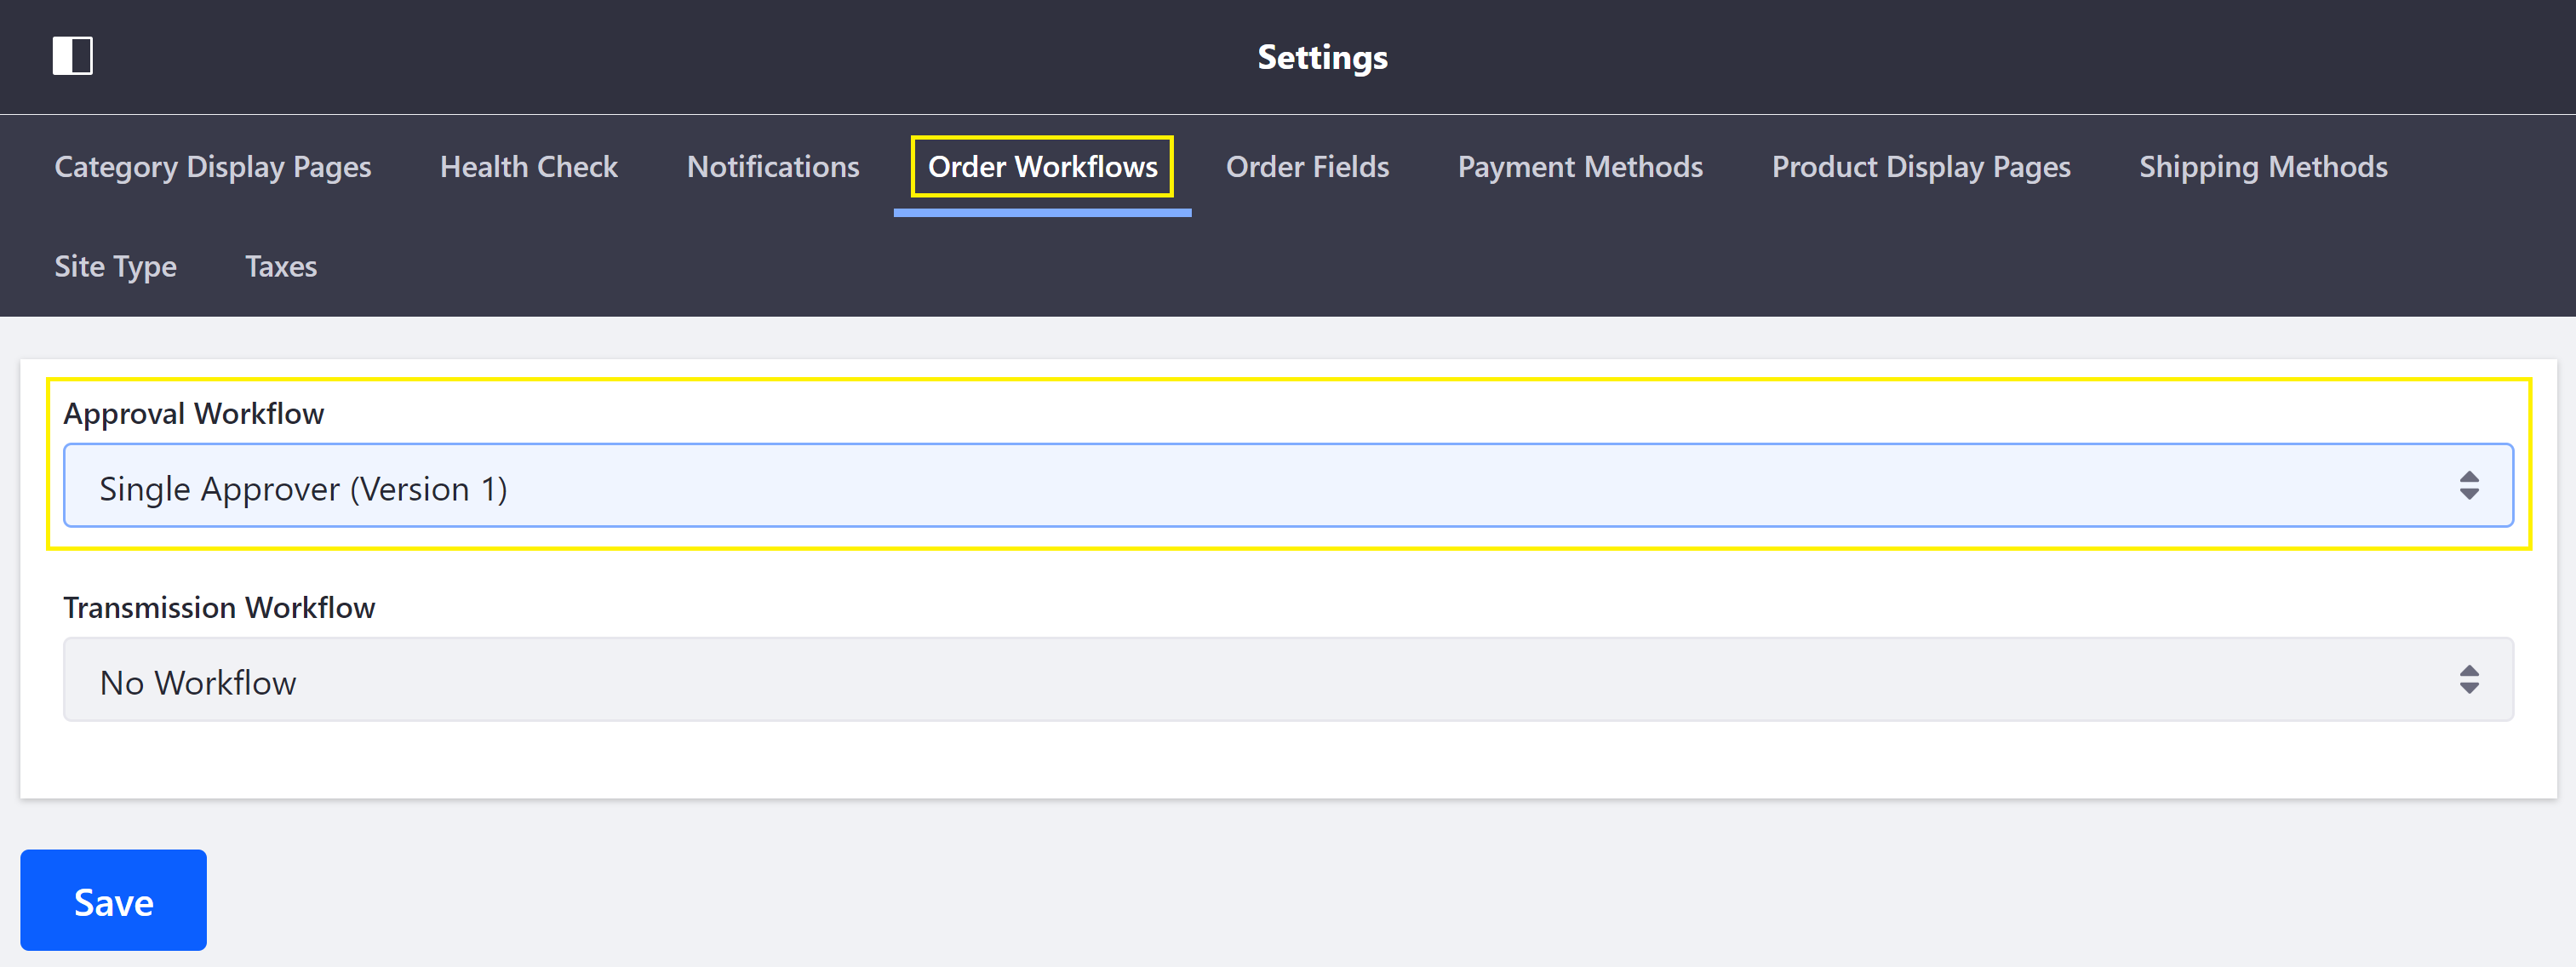 Enable Buyer Approval Workflow on the Order Workflows tab.